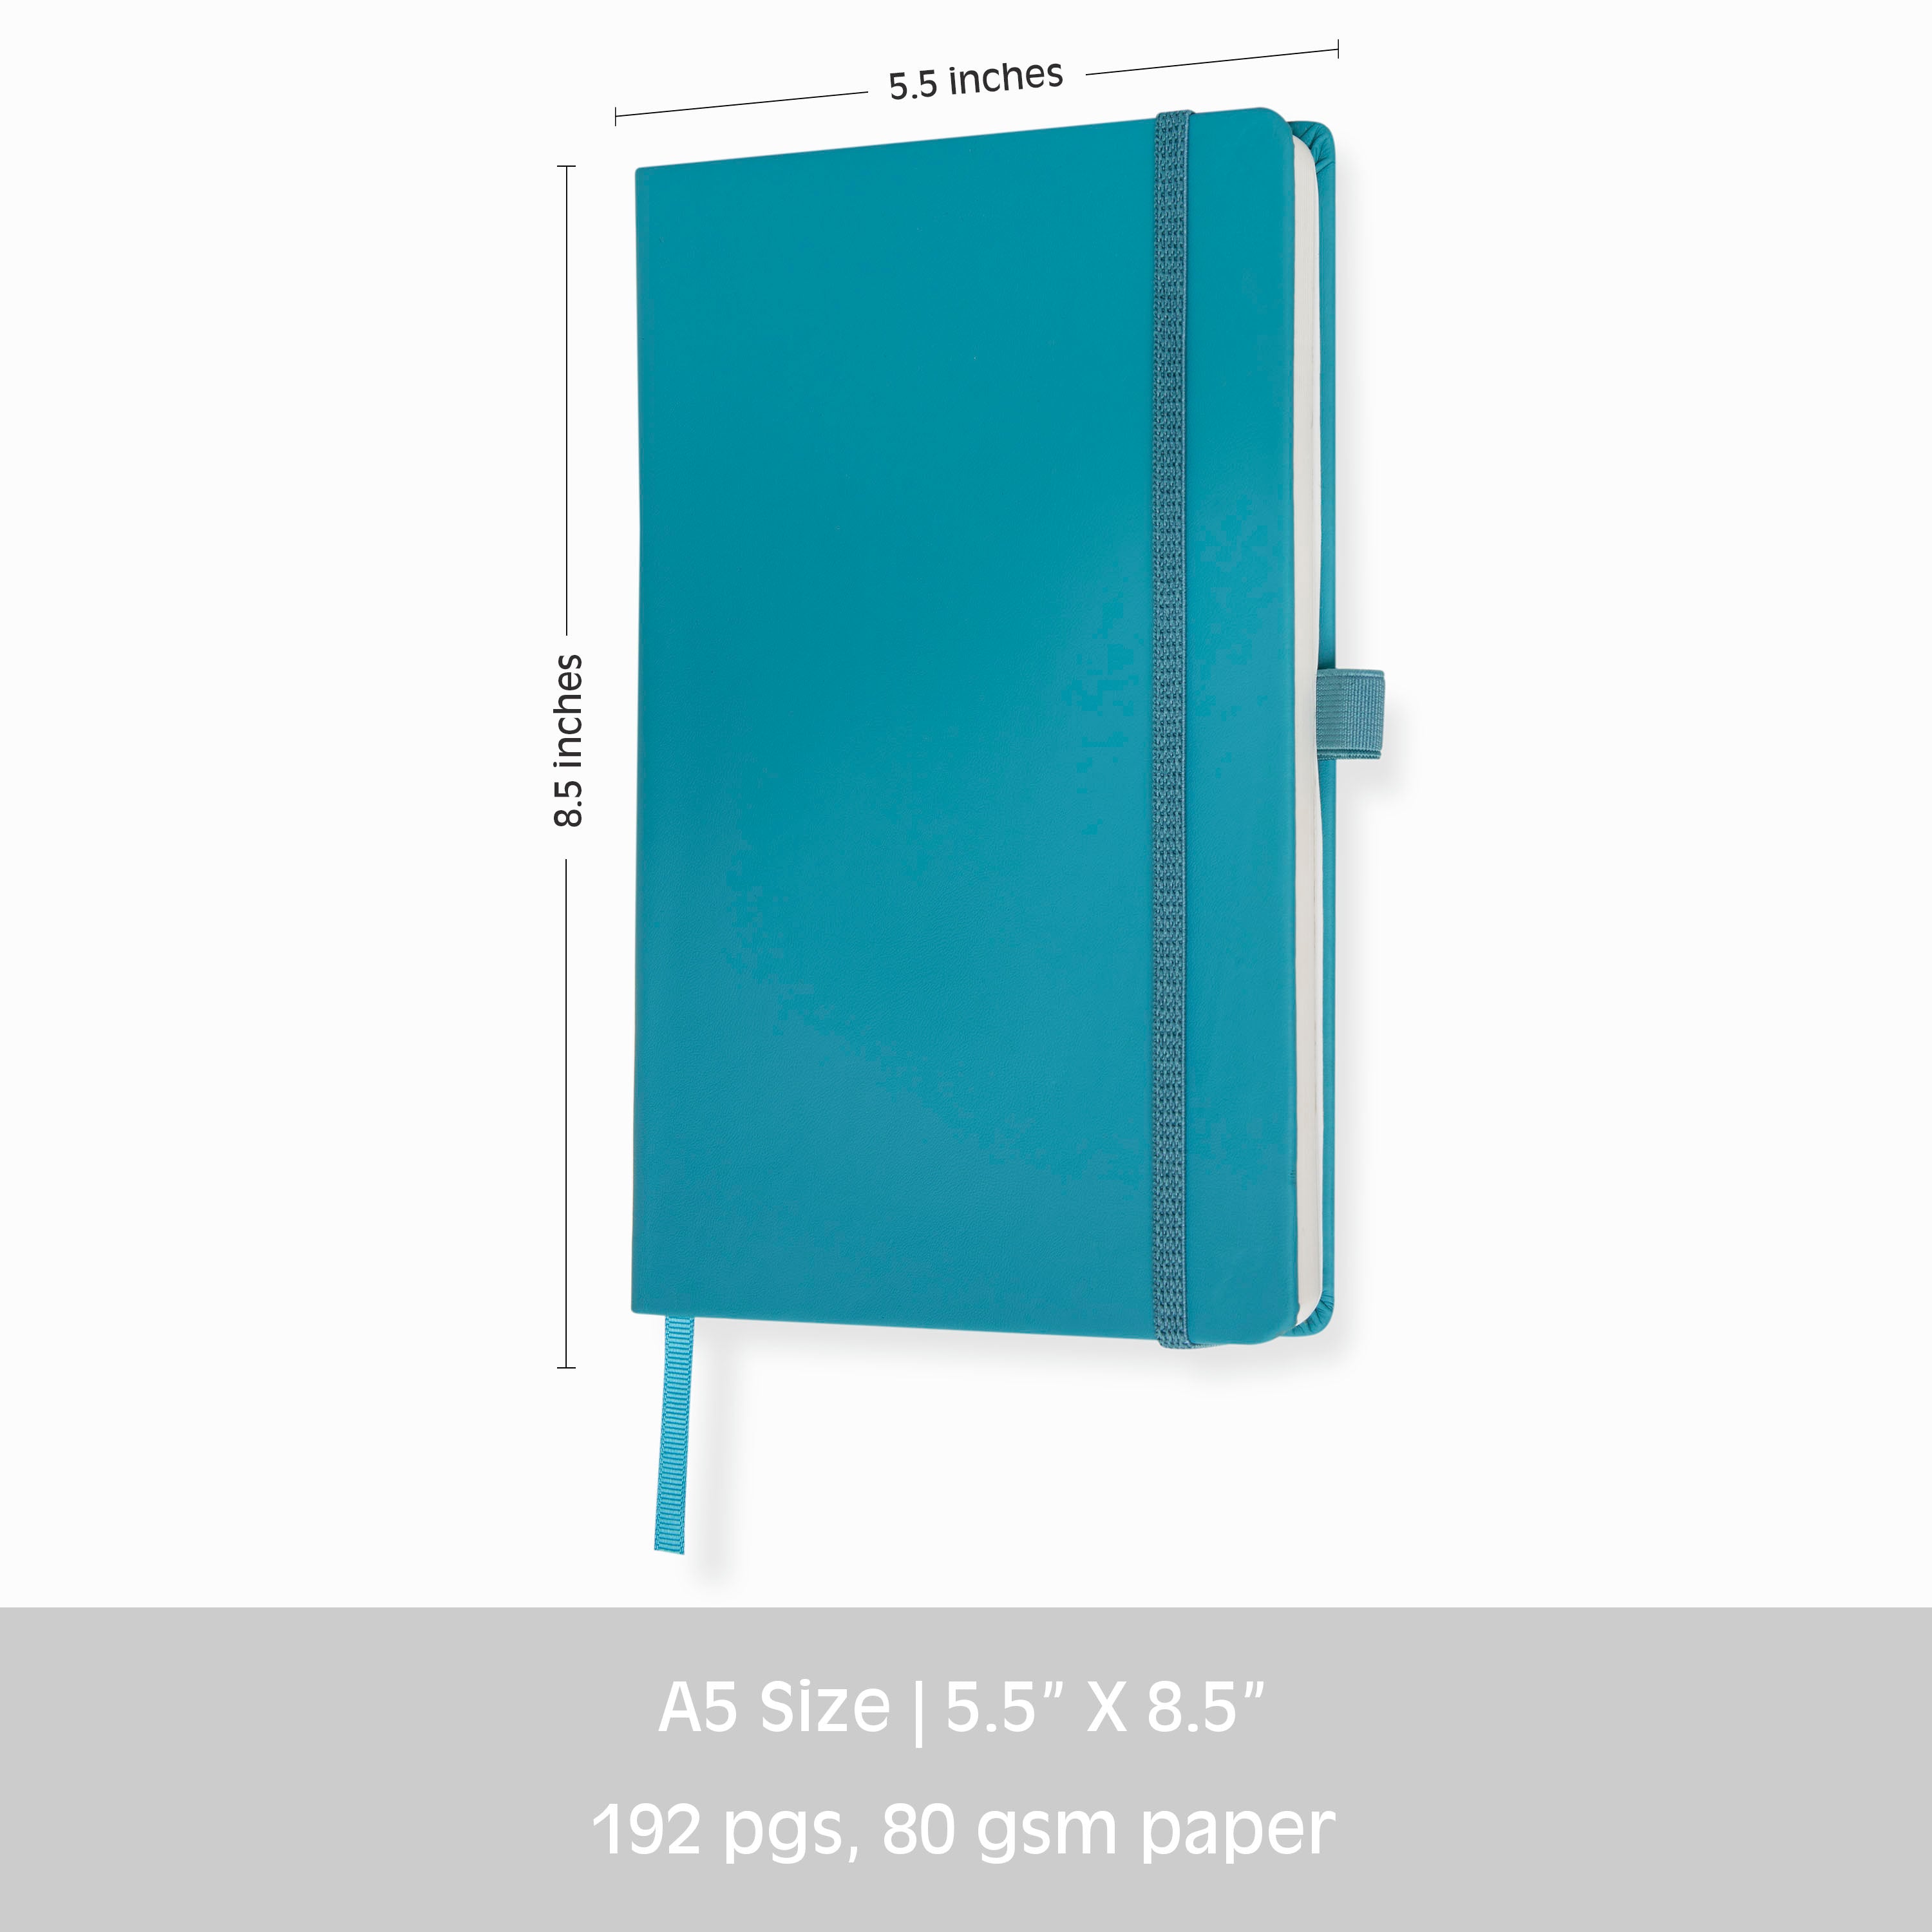 Pro Series Executive A5 PU Leather Hardbound Unruled Diary with Pen Loop - TURKISH BLUE